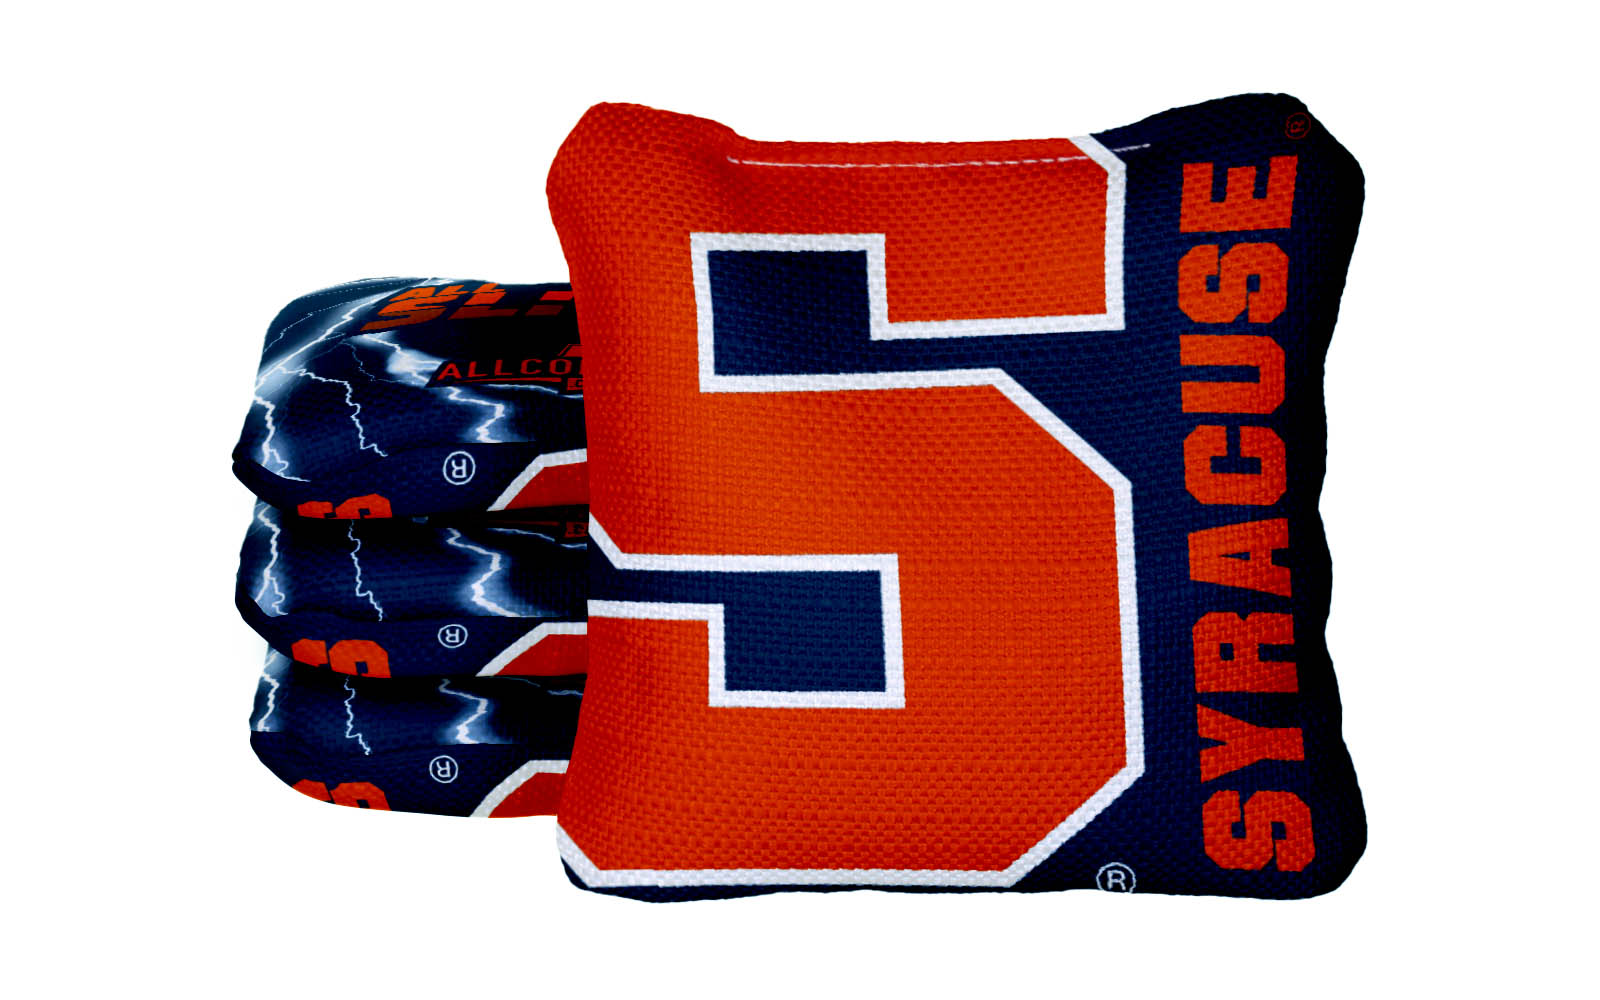 Officially Licensed Collegiate Cornhole Bags - All-Slide 2.0 - Set of 4 - Syracuse University